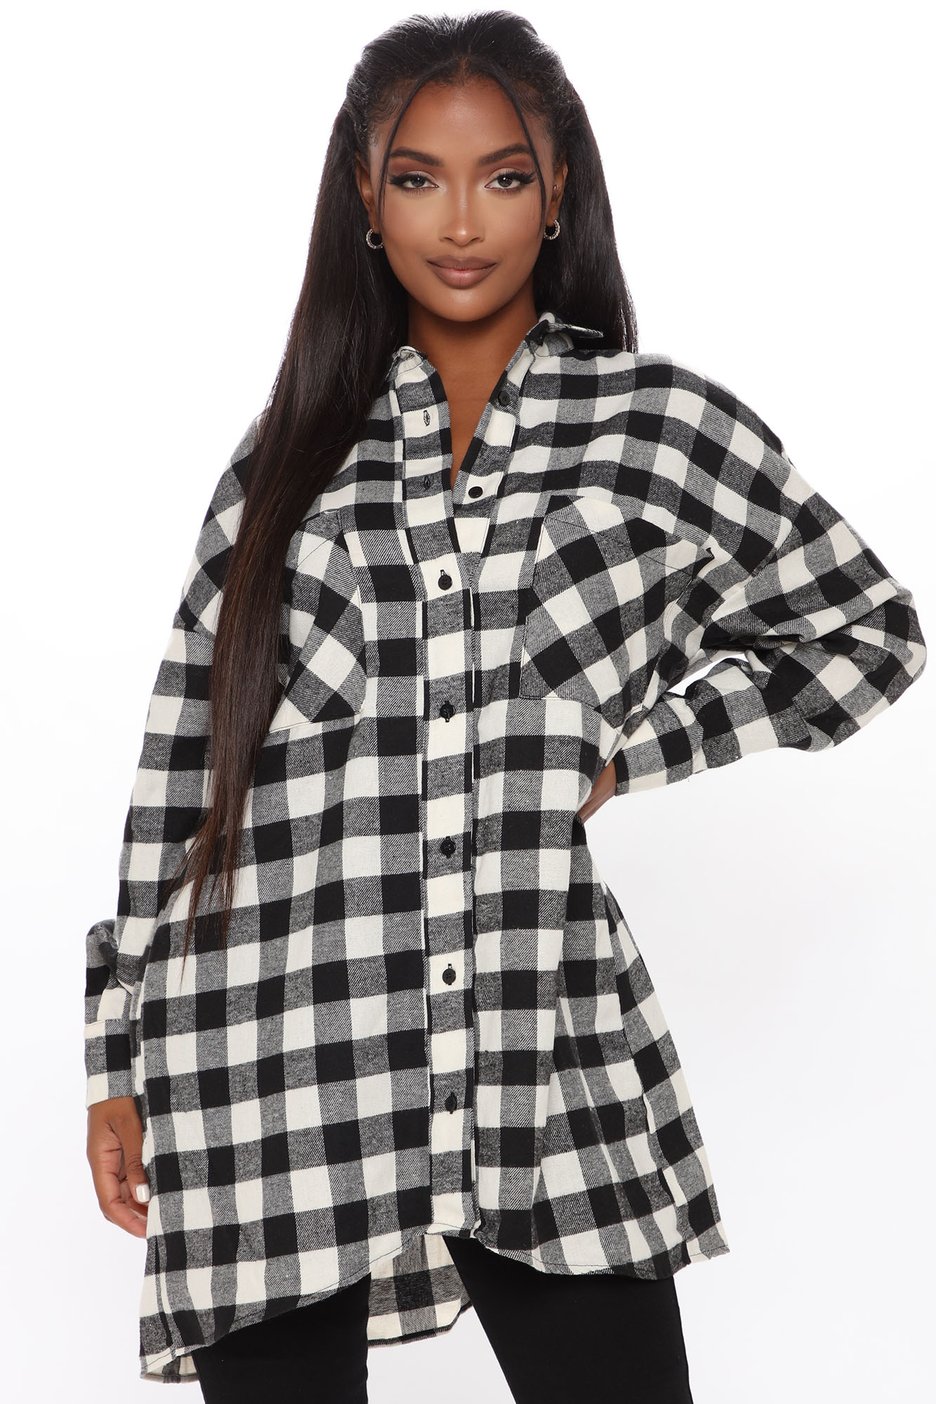 Brooke Valentine – Rocks Spending Nova Plaid Time and While With Bomb Fashion Tunic Chí Fashion Daily White Black Her Daughter